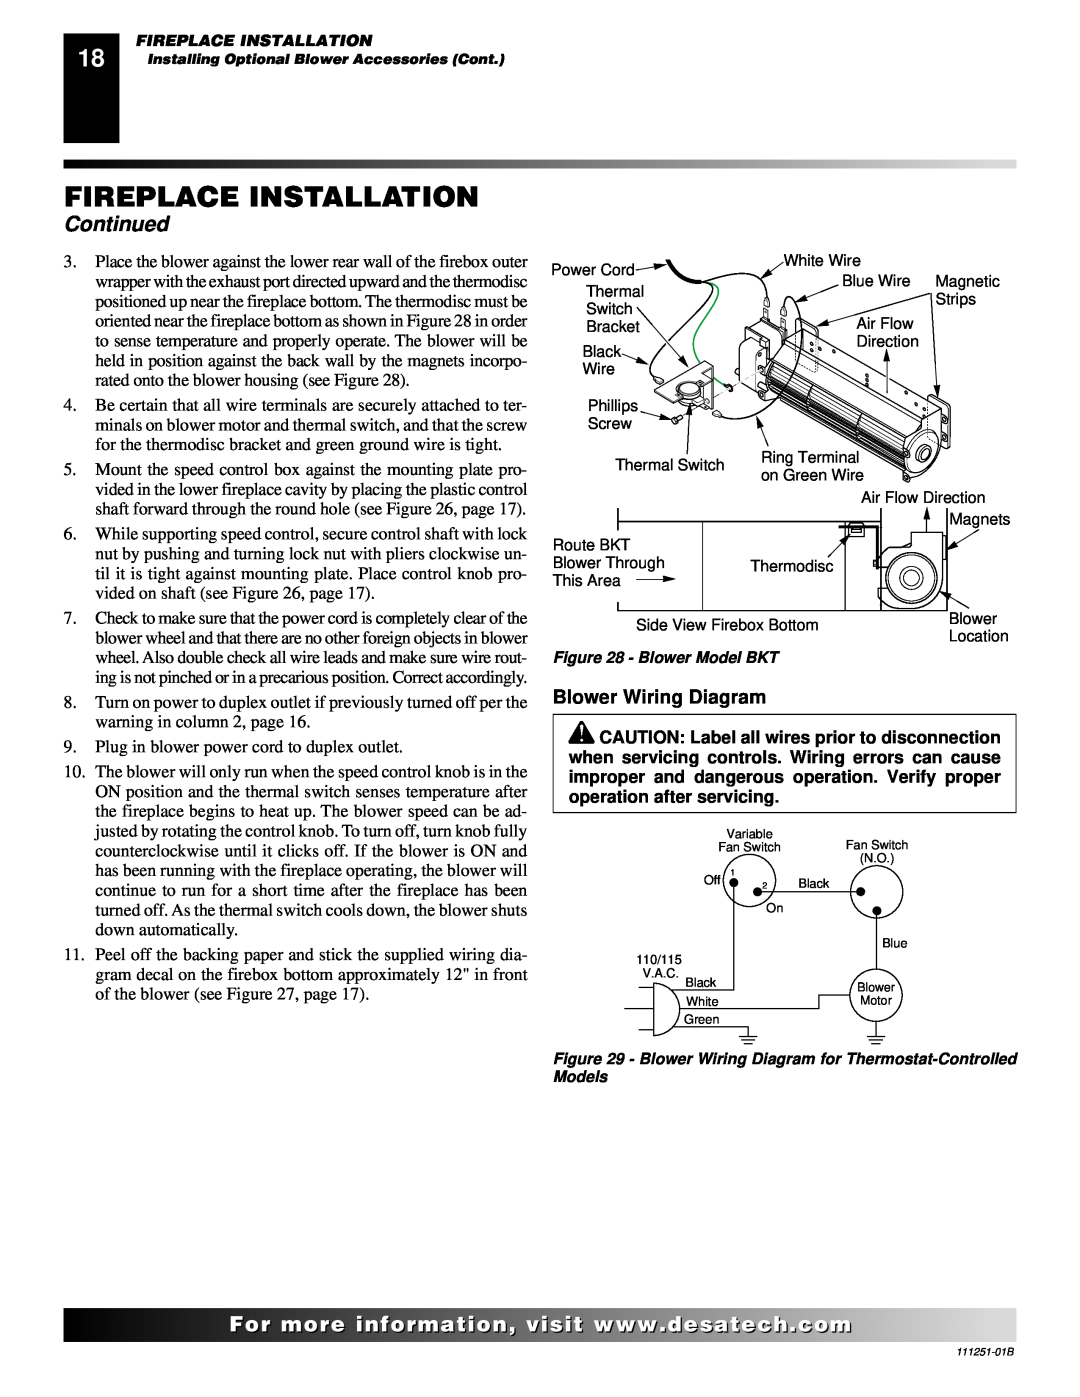 Desa (V)T36ENA installation manual Fireplace Installation, Continued, Blower Wiring Diagram 